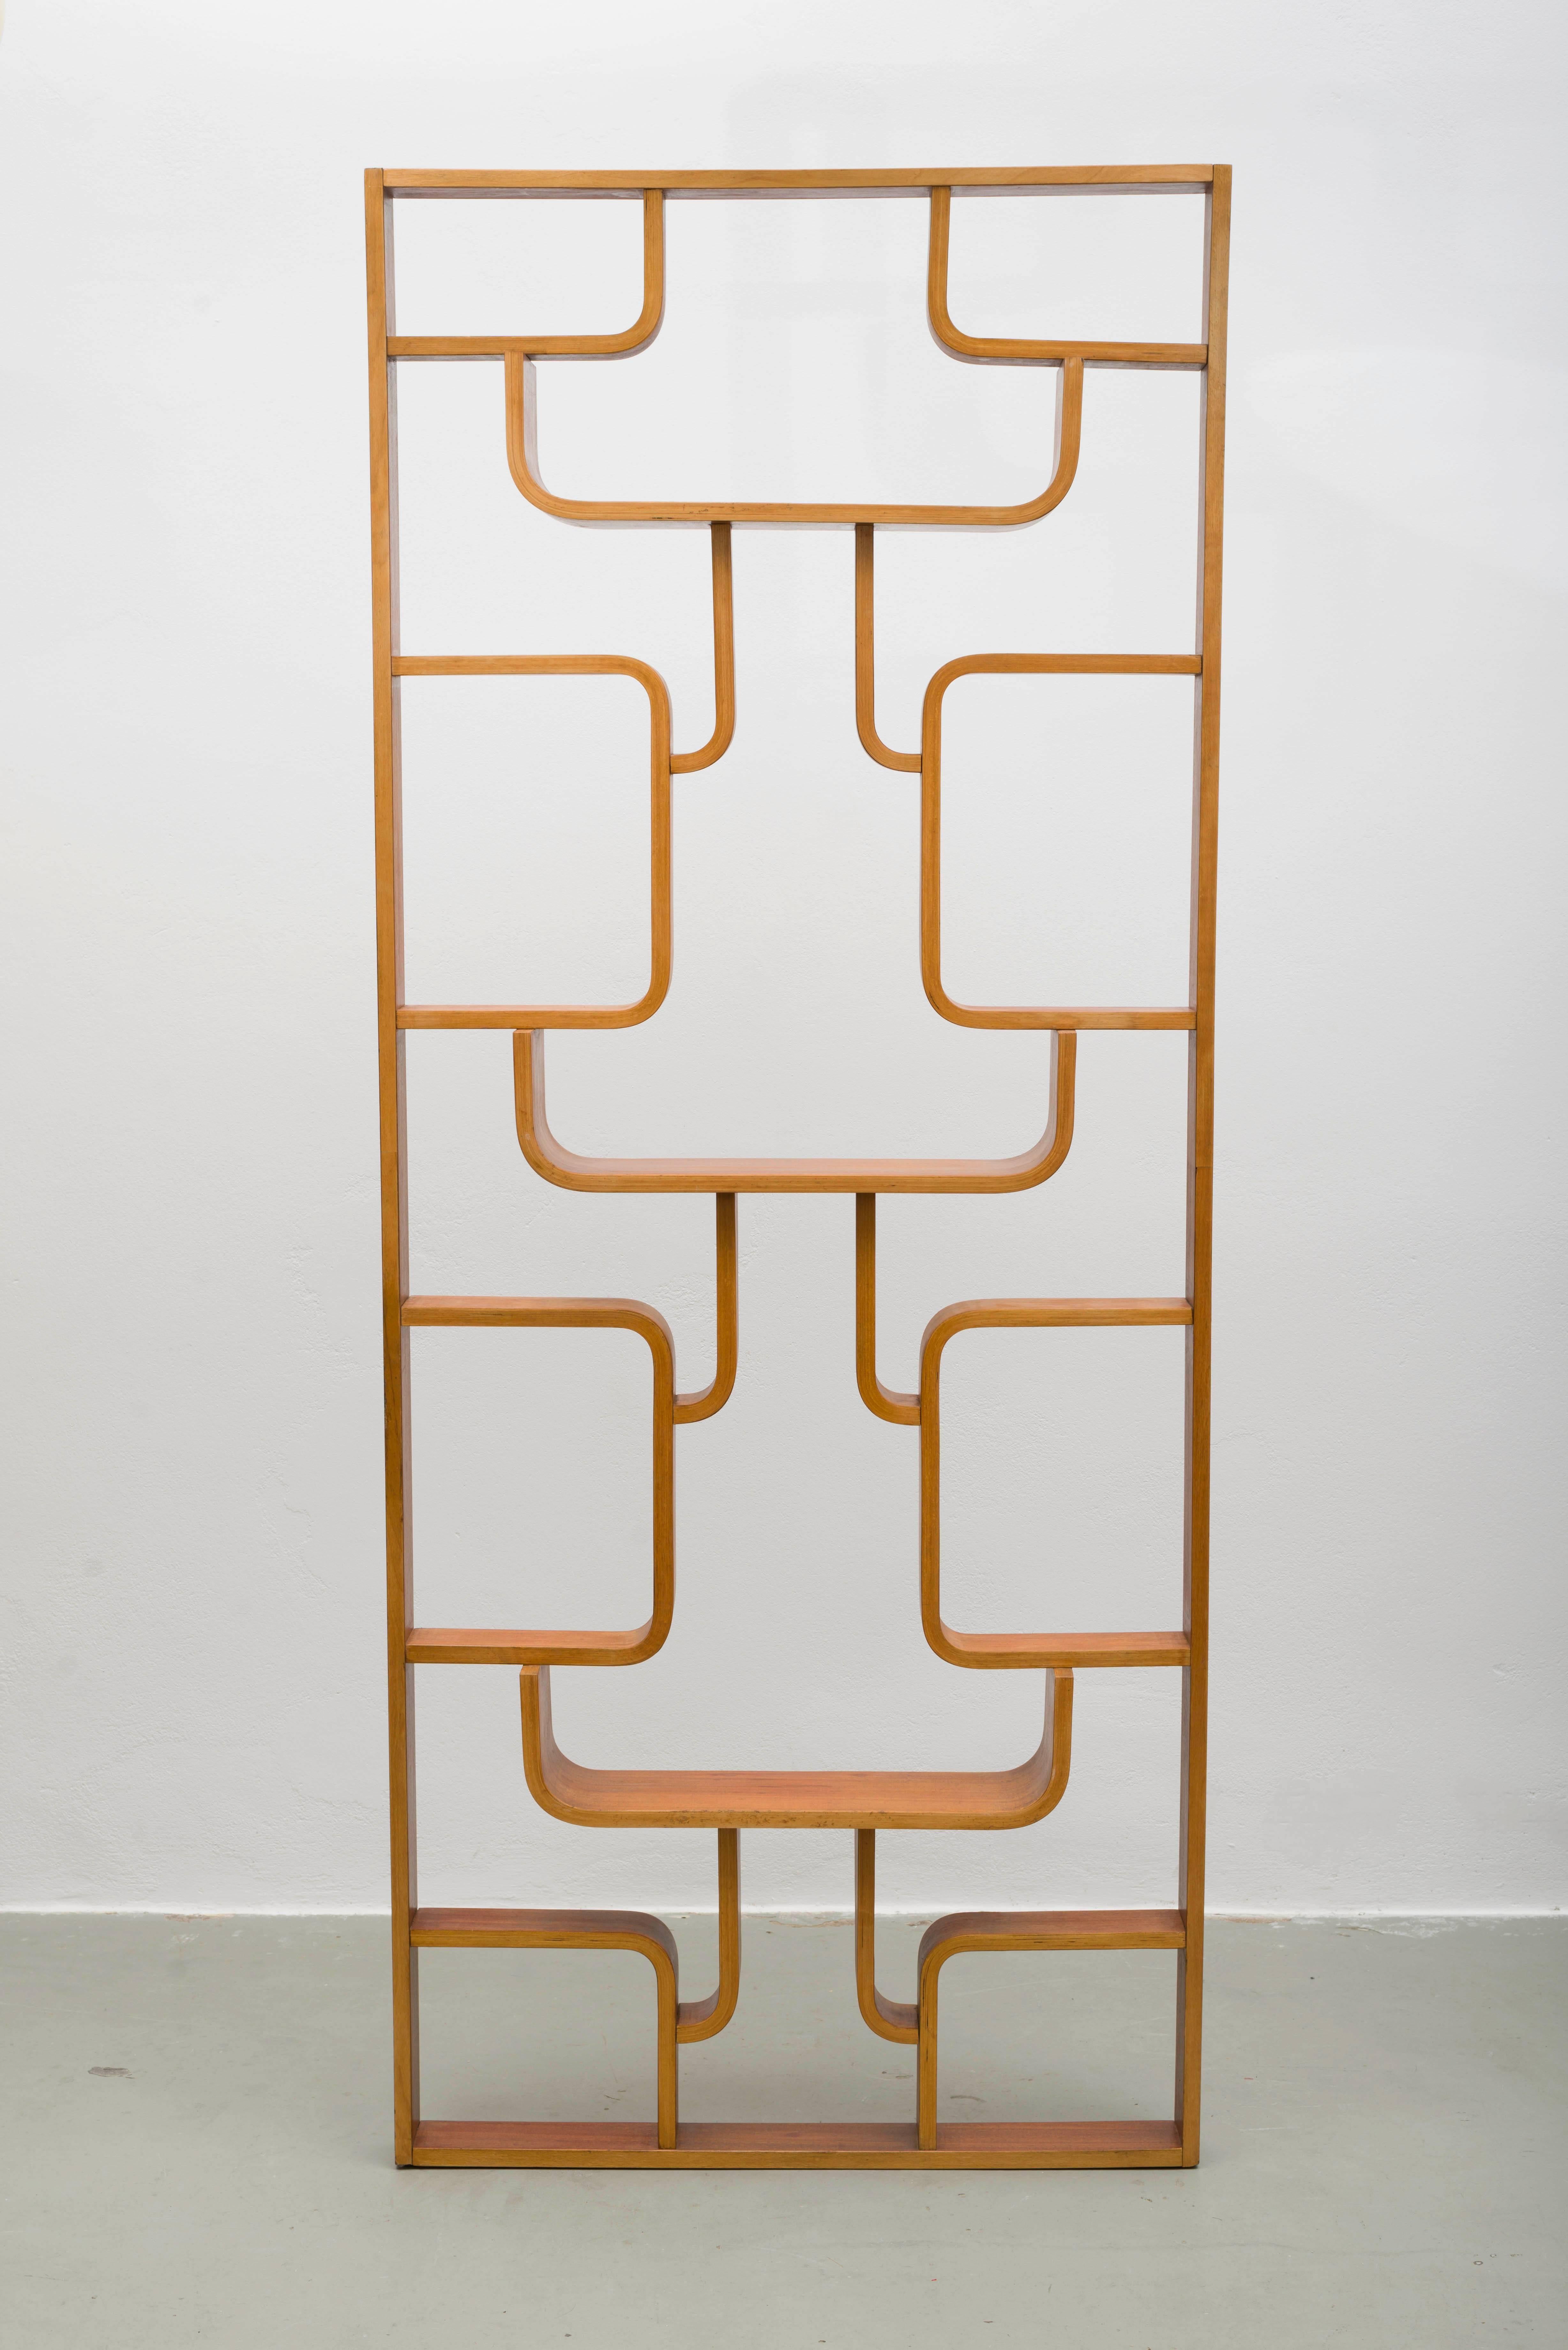 Room divider from the 1960s by Ludvik Volak (student of Pavel Janak) for Drevopodnik Holesov.
It is made of plywood with a mahagony veneer. Excellant condition. 